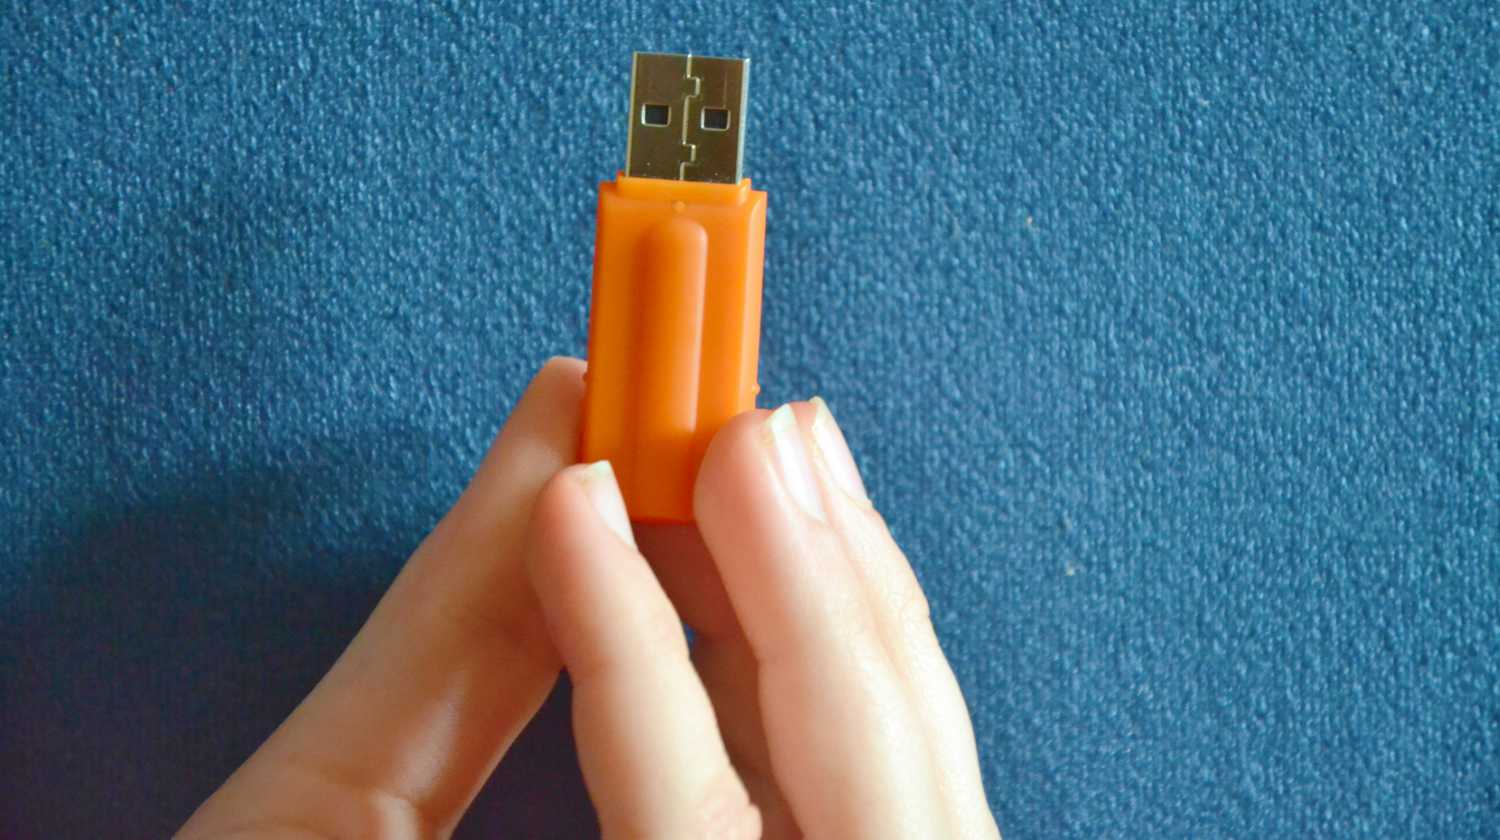 Things To Look Out For Before Buying a Pendrive